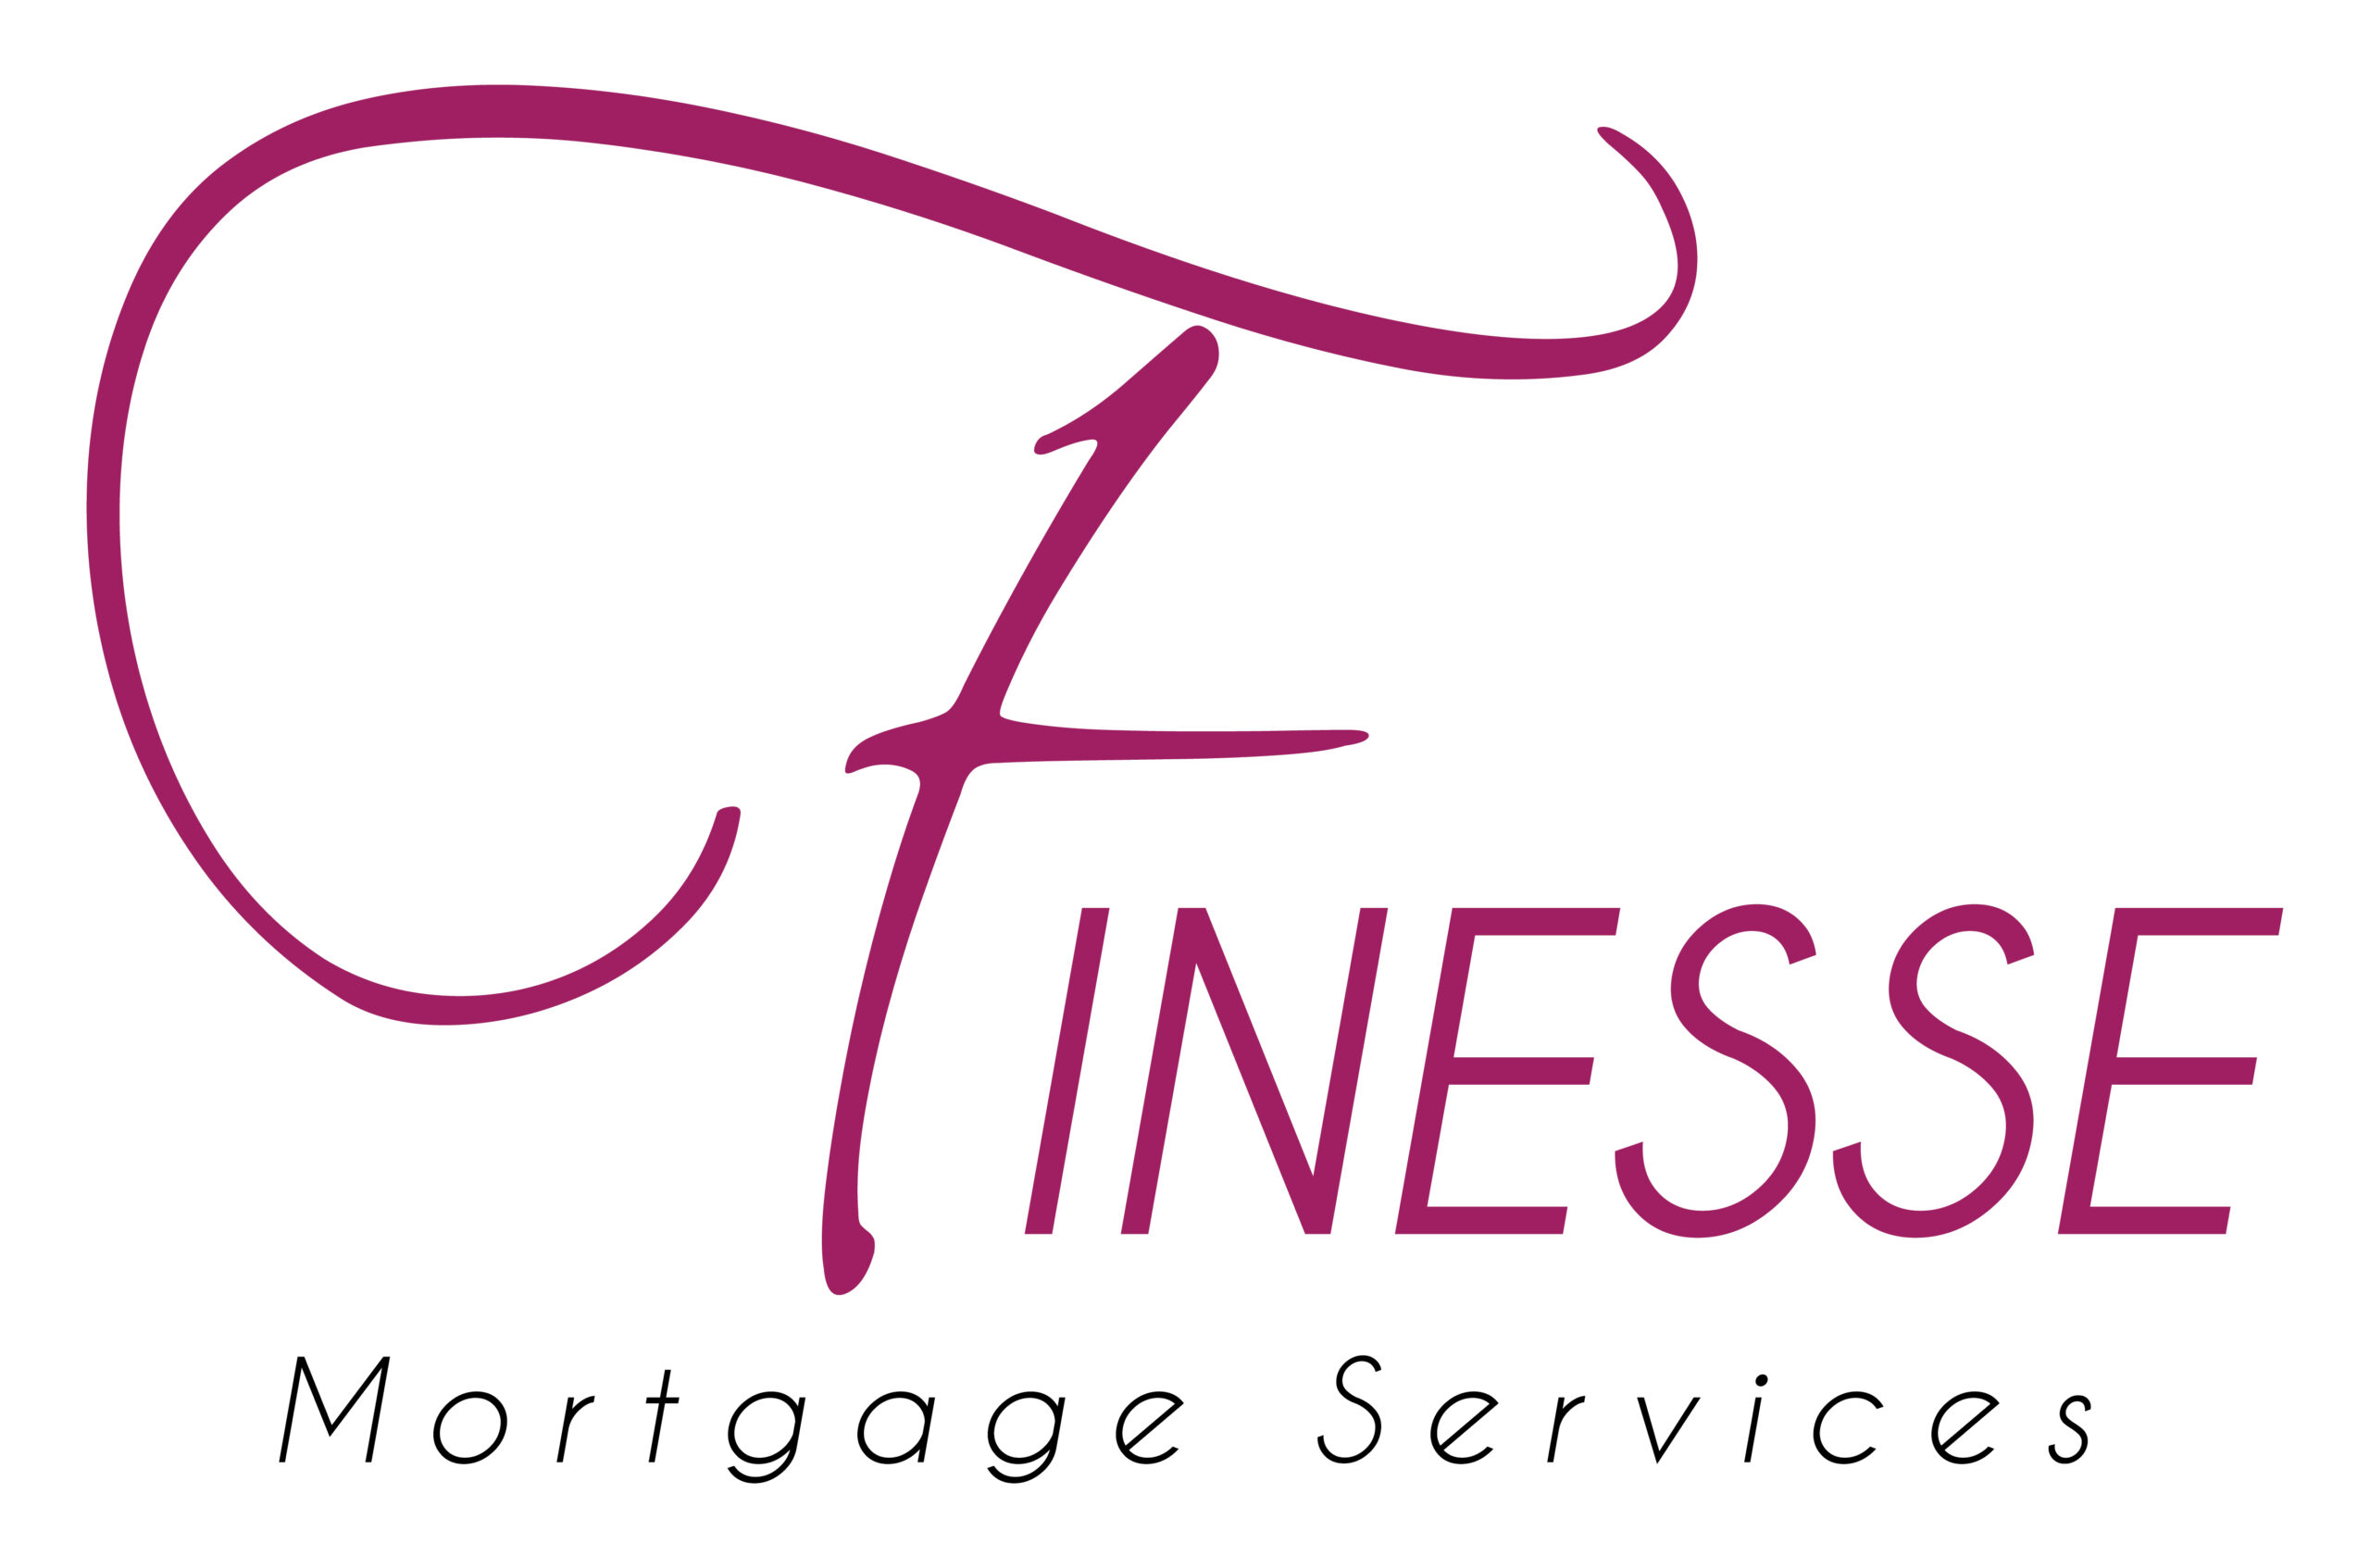 Finesse Mortgages